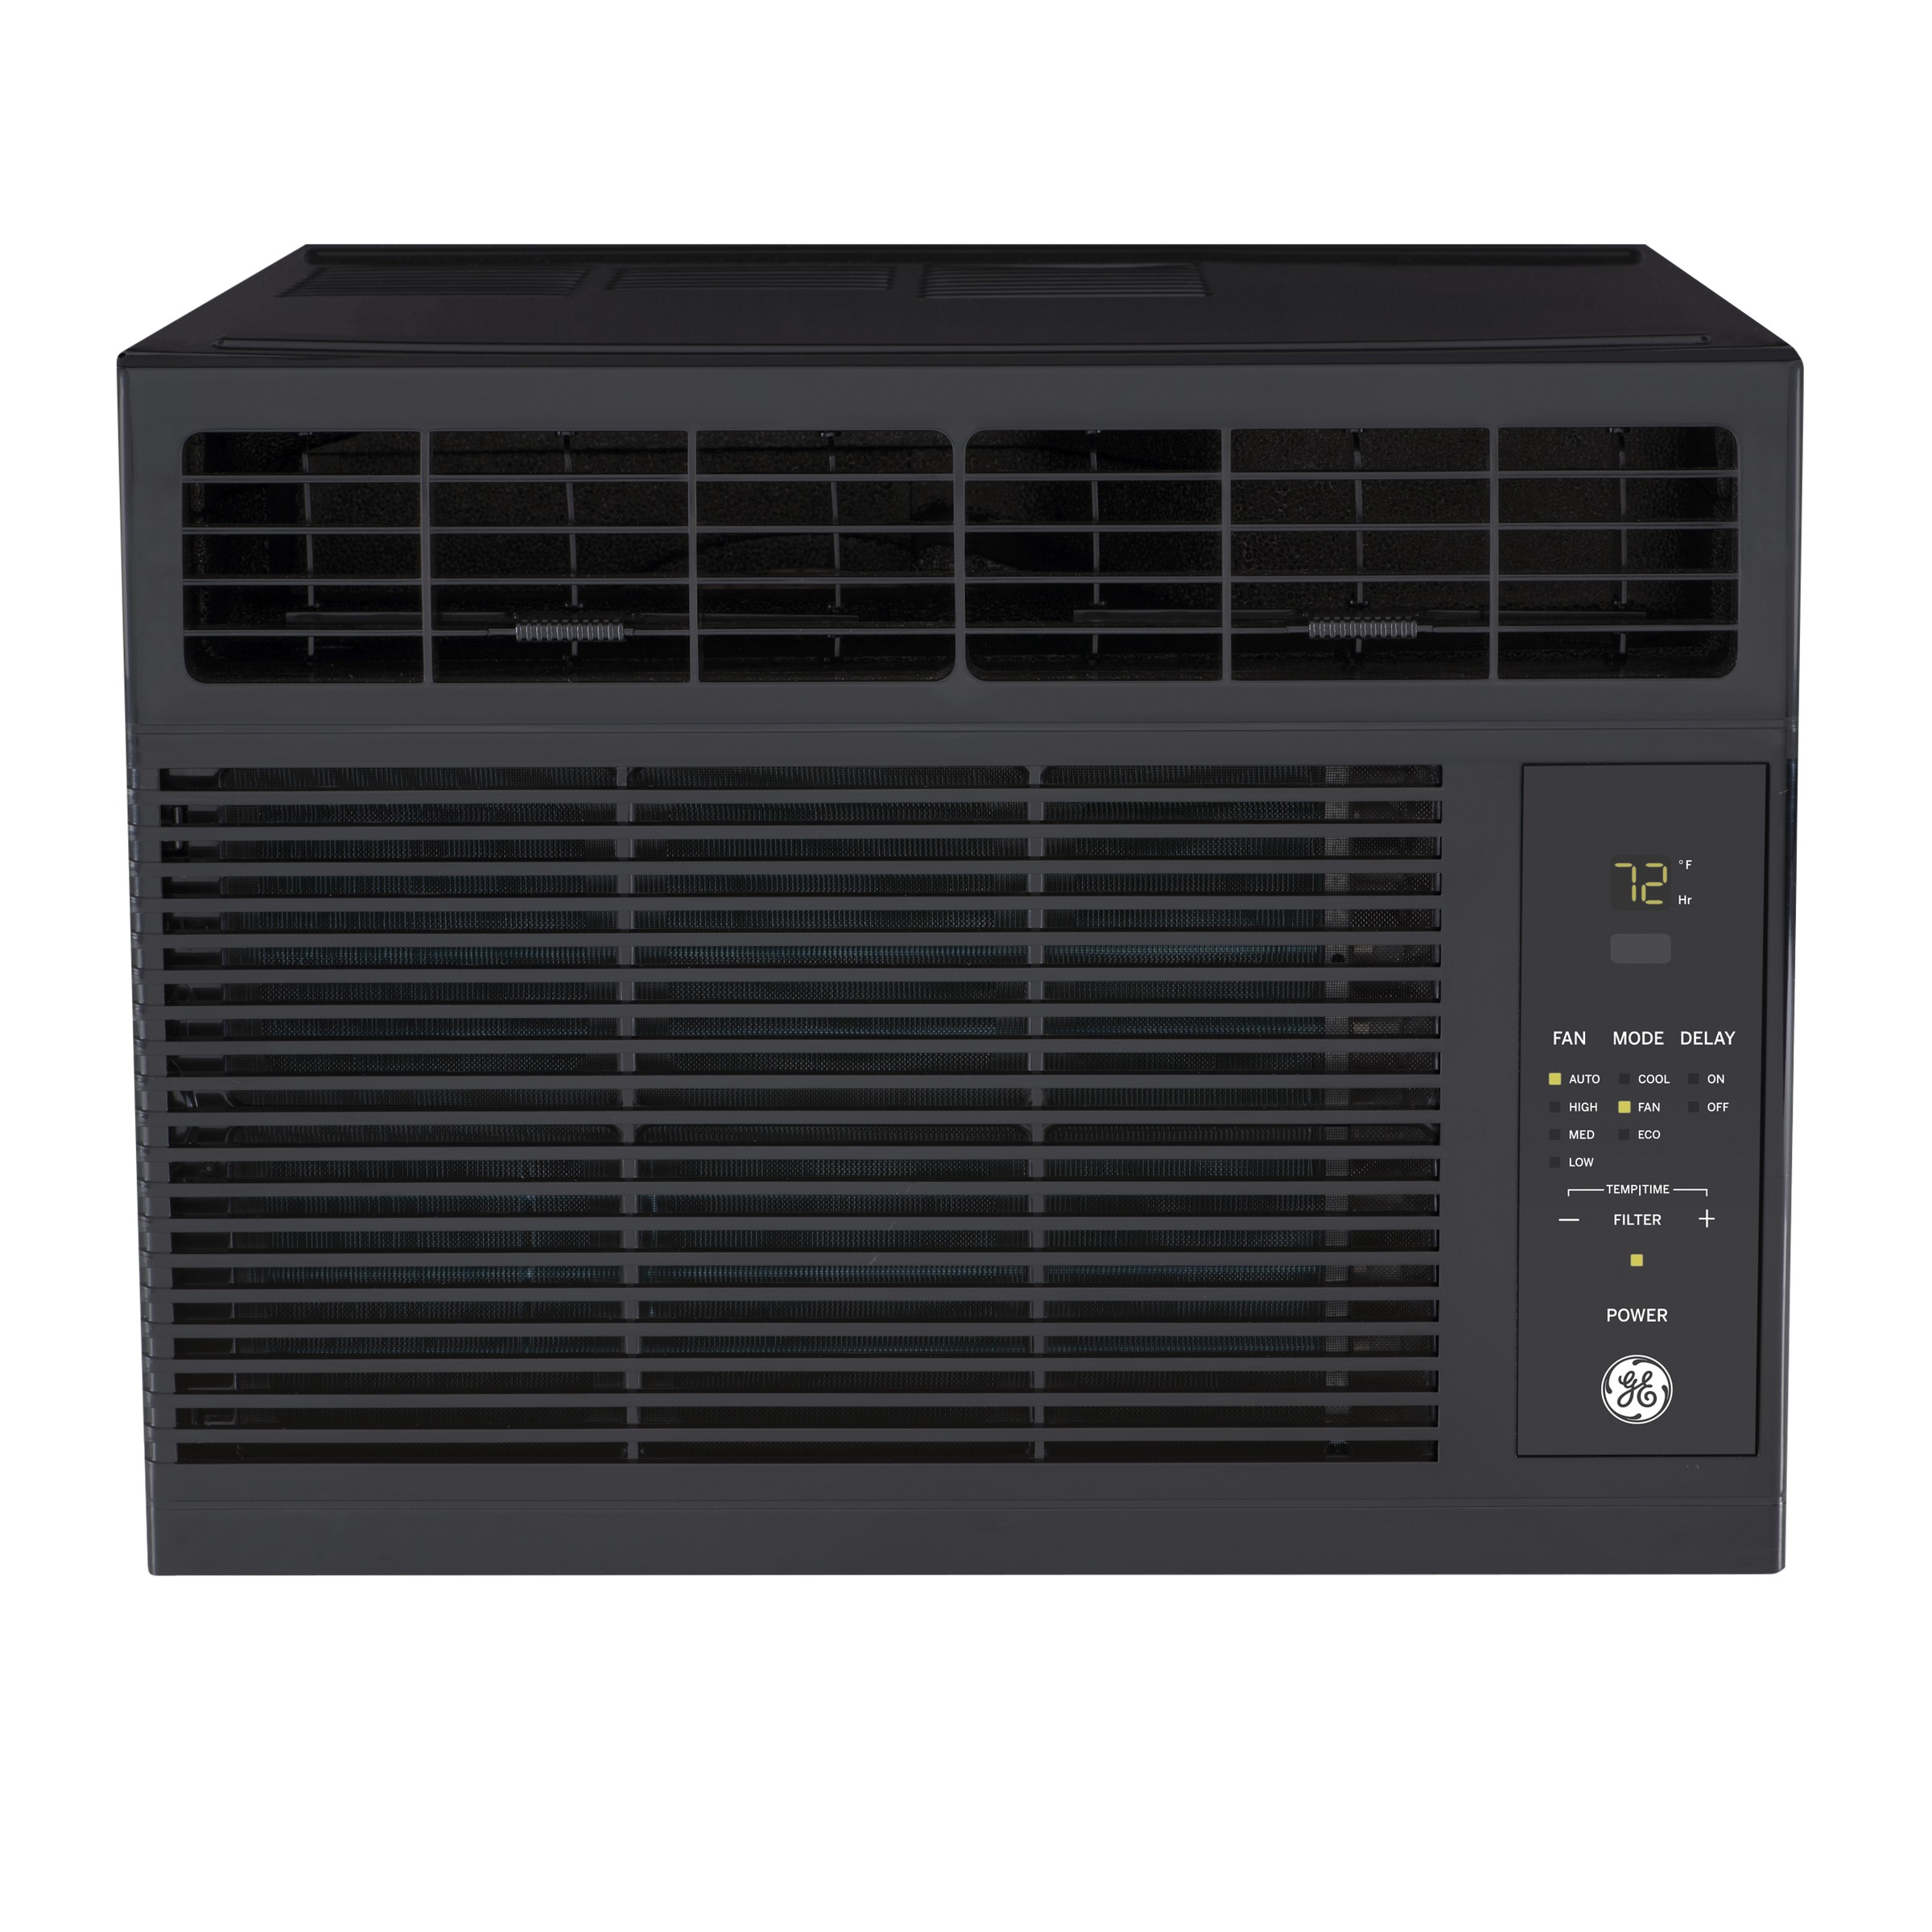 GE® 5,000 BTU Electronic Window Air Conditioner for Small Rooms up to 150 sq ft., Black